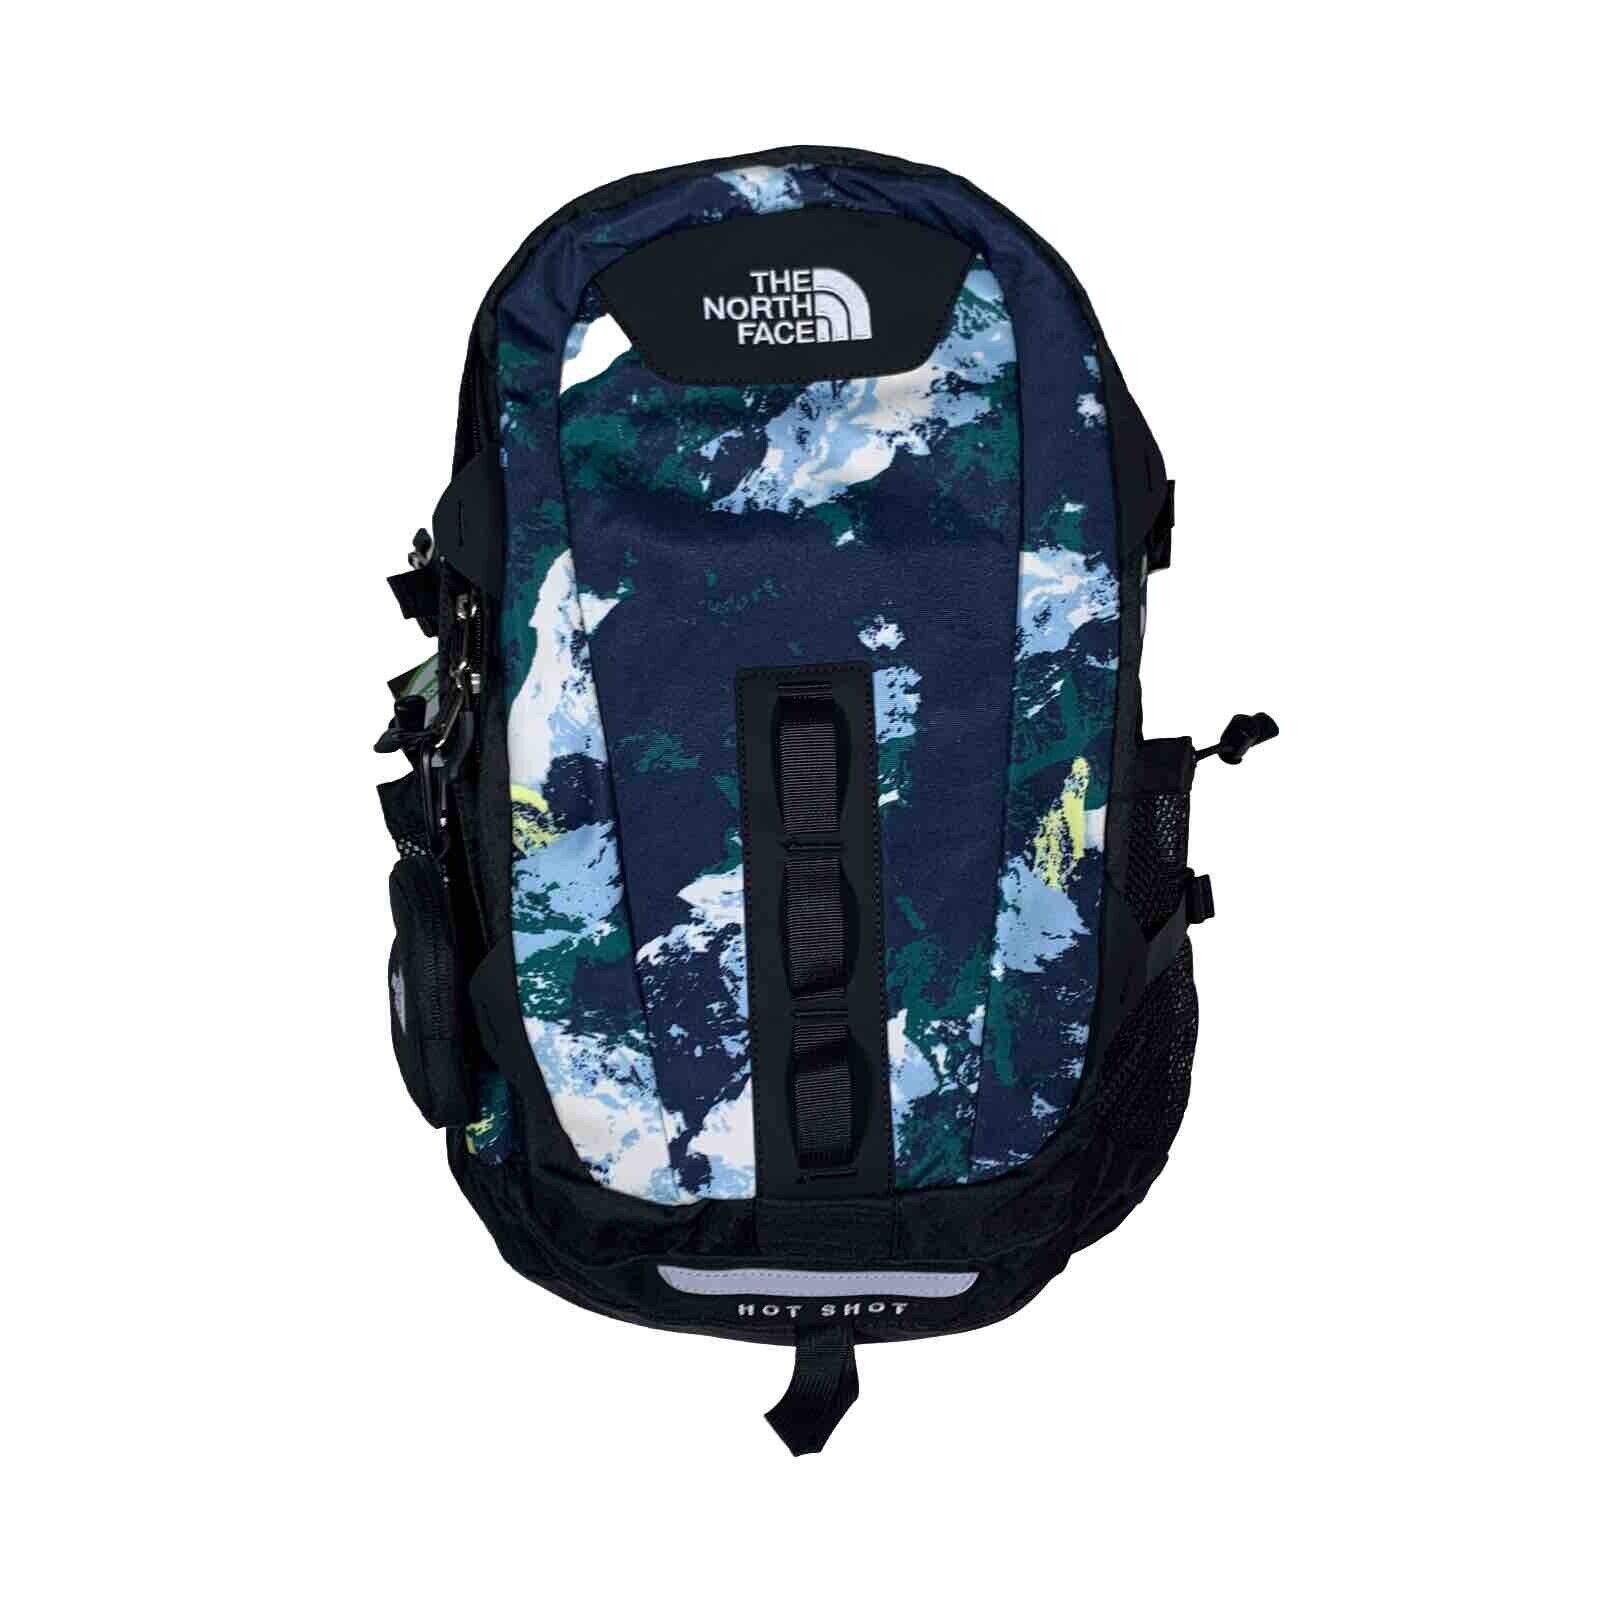 The North Face Hot Shot Backpack. New With Tags. Mountain Graphic. Unisex. 28L.